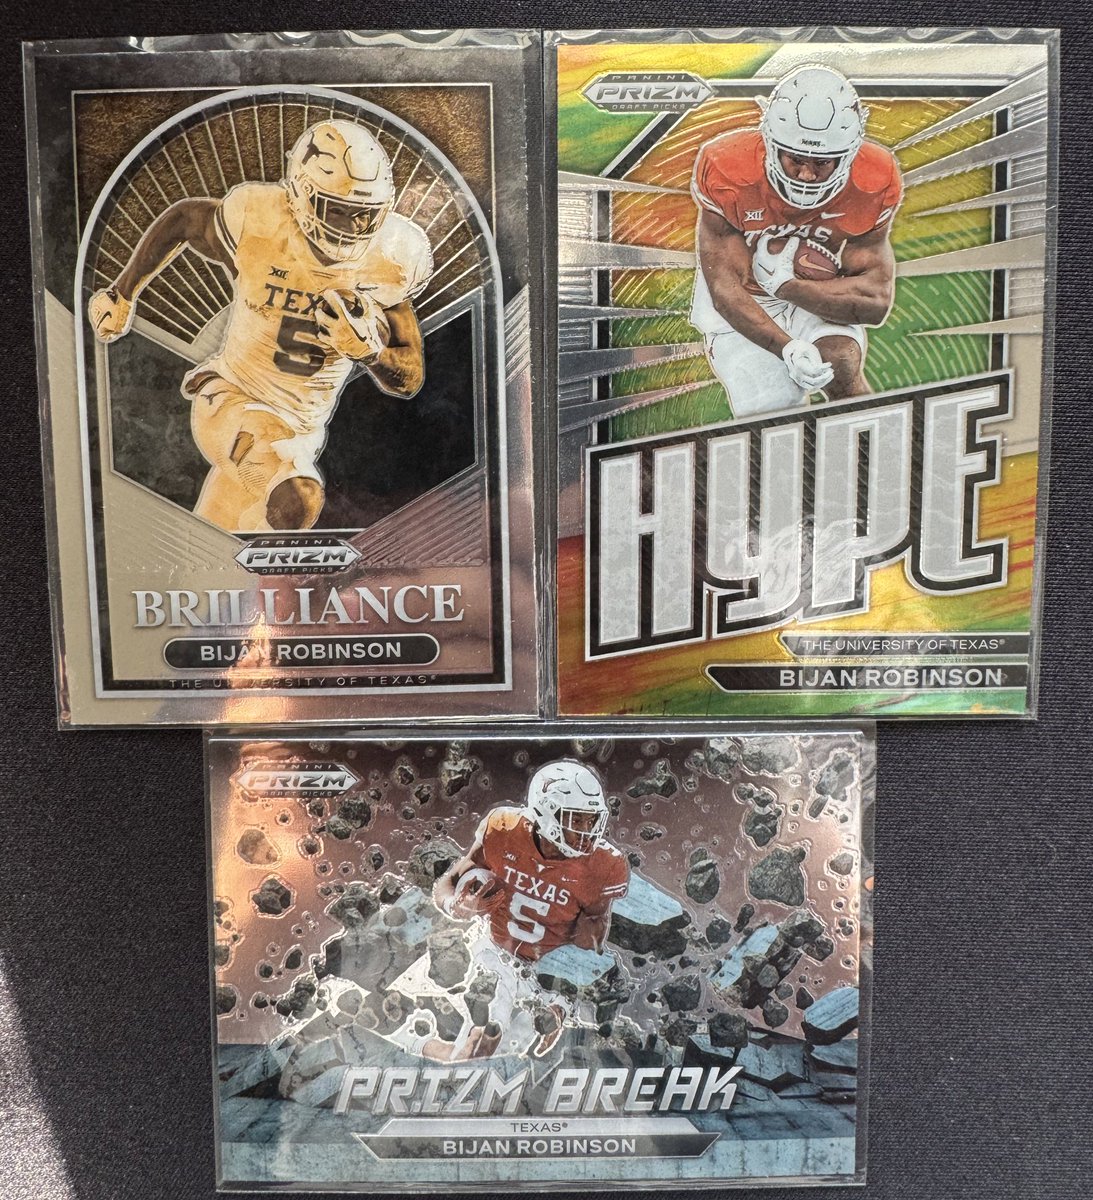 FRIDAY FUNDAY ONE-DAY GIVEAWAY! As a thank you to all my Texas family out there for the support 🤘🏽 TWO random winners who are following+ retweets + likes this post will get to choose three cards each. JT /75 Worthy aqua /299 Whitt refractor 1st Bijan inserts #hookem